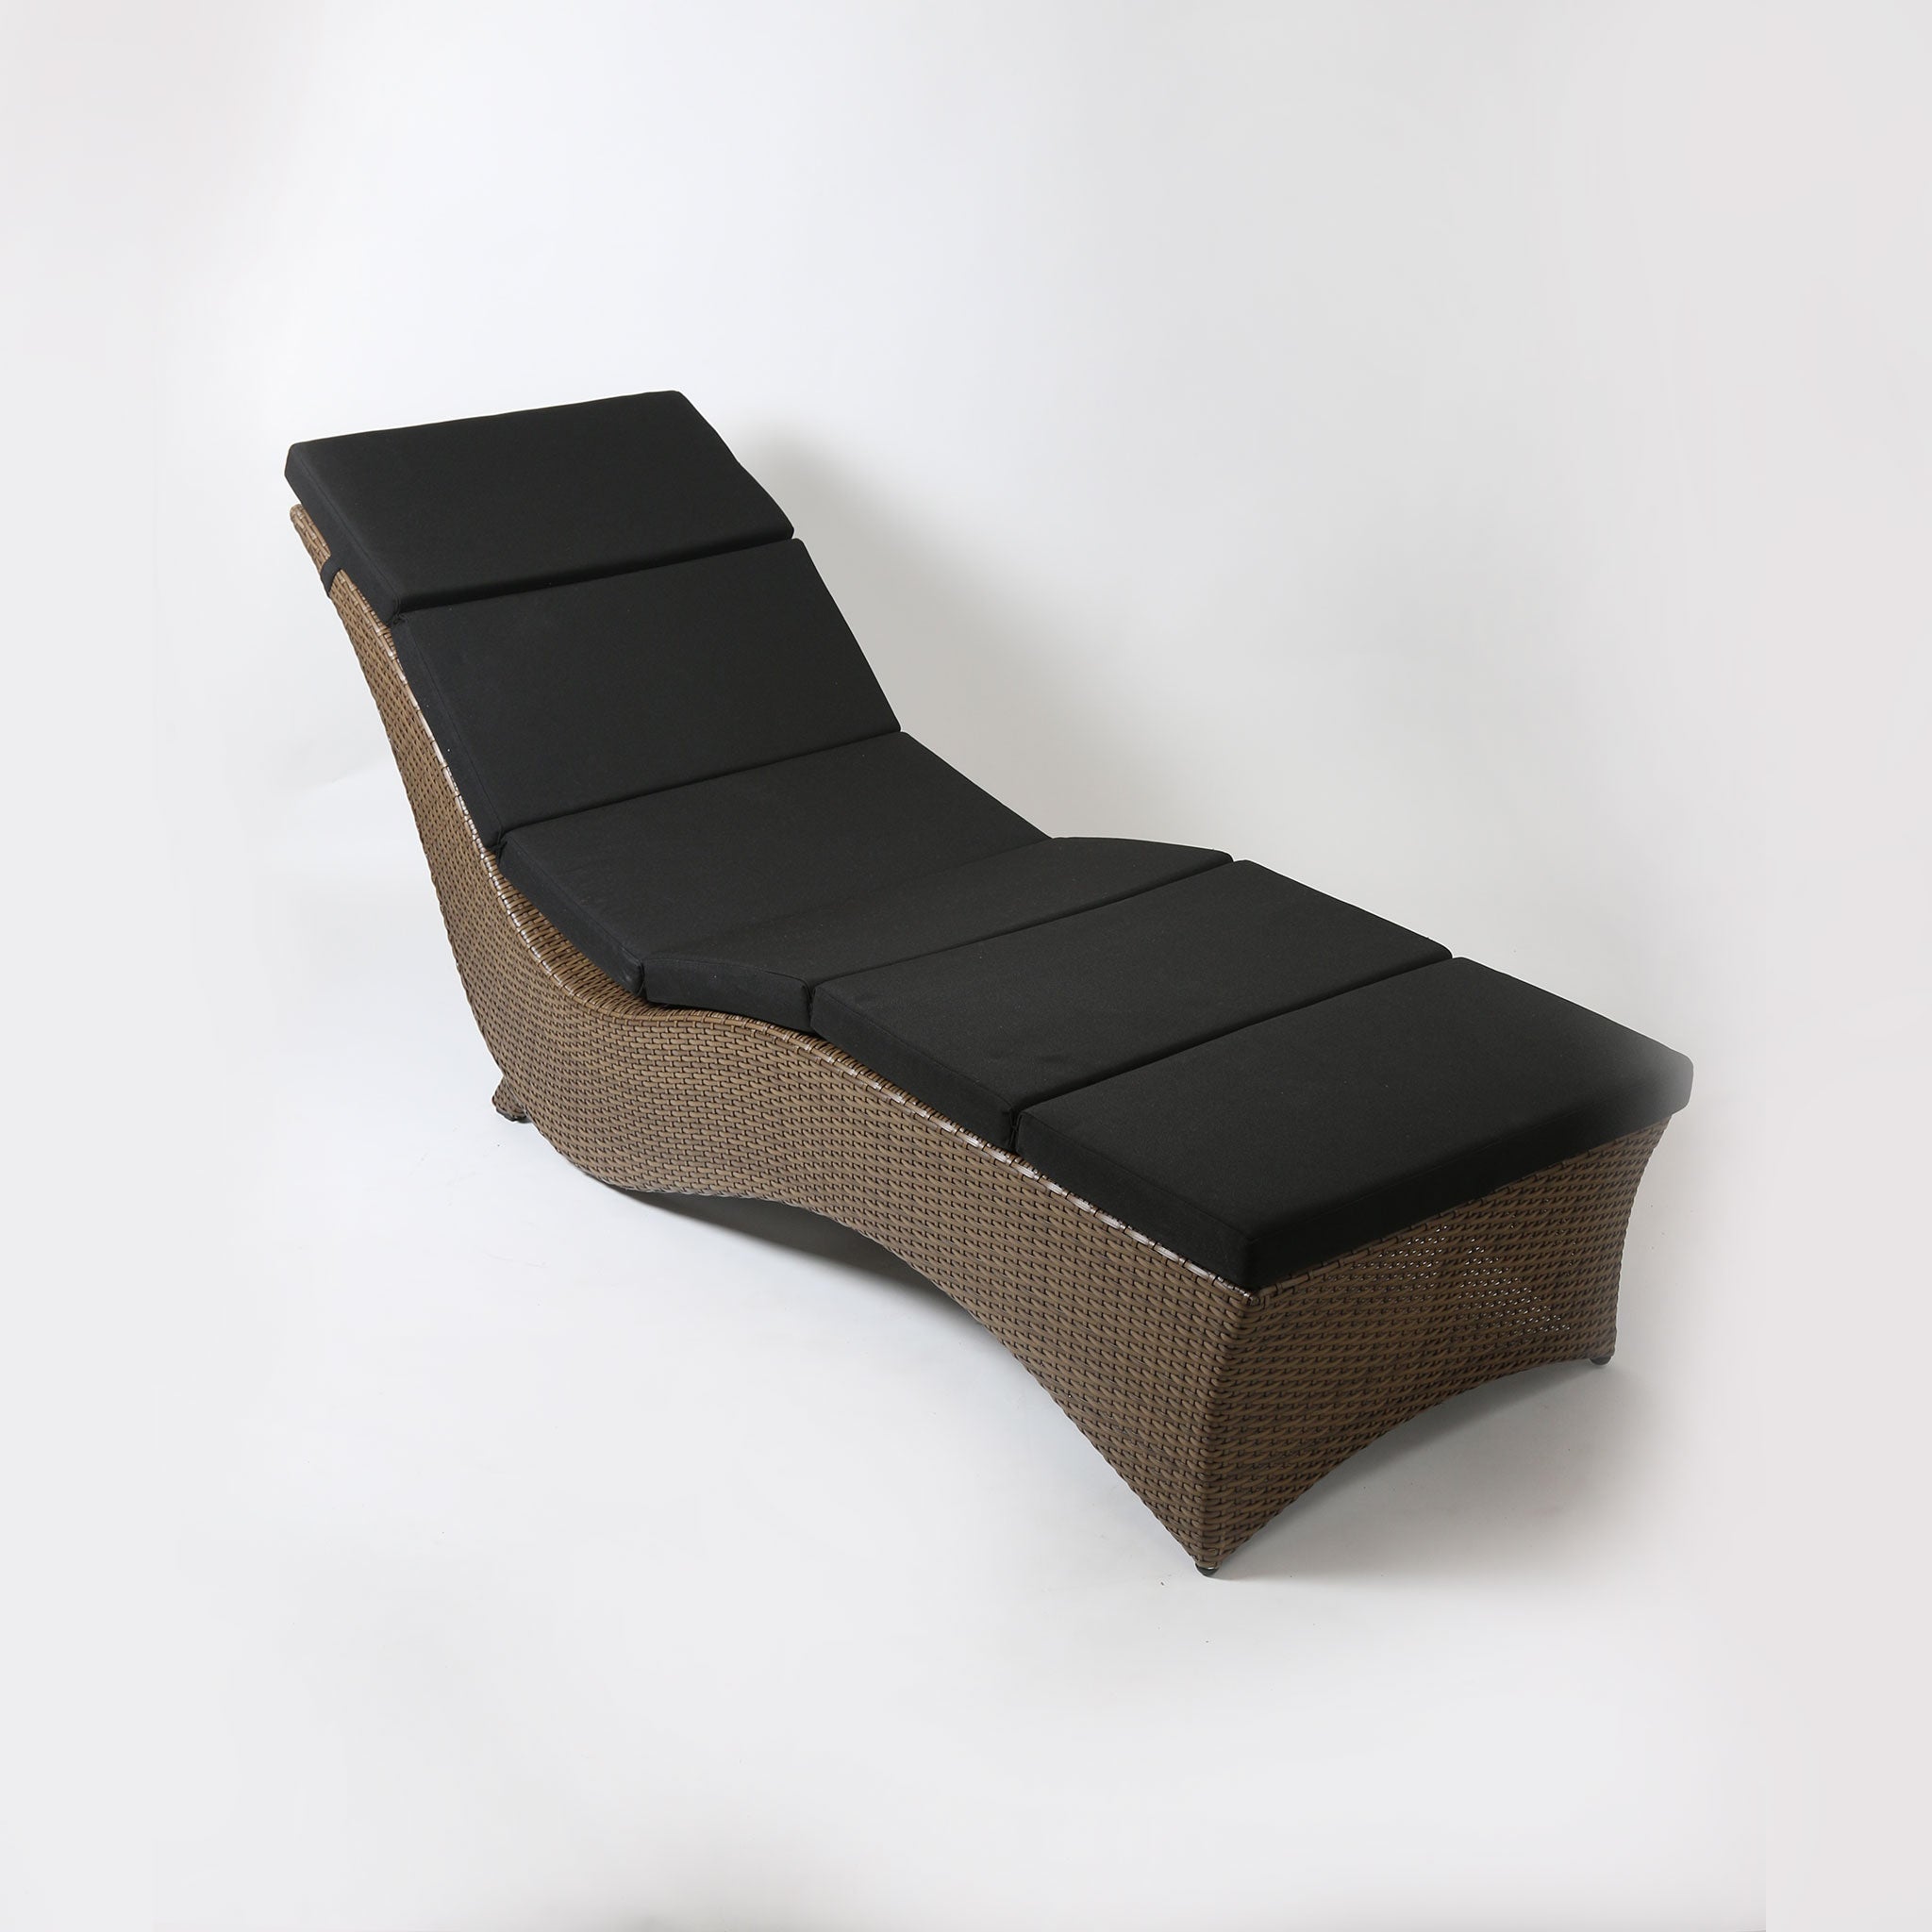 Chocolate Brown Wicker Sun Lounger with Black Cushion